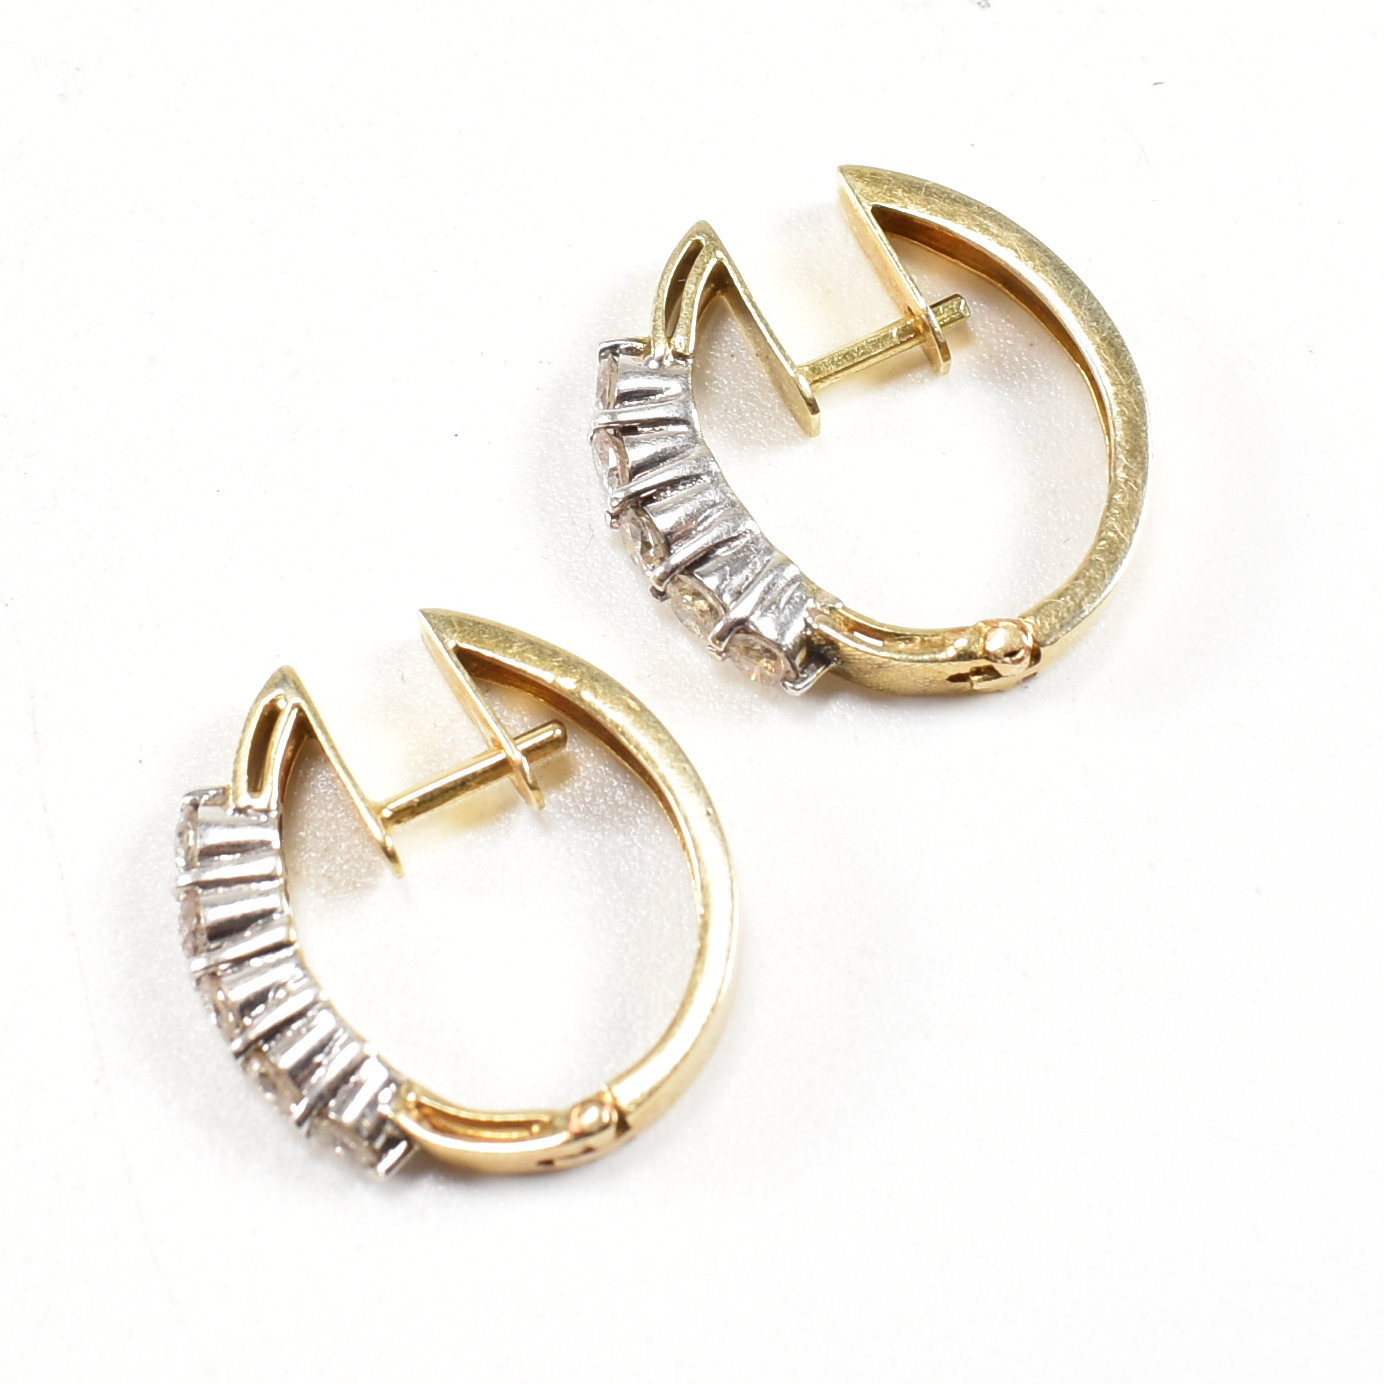 PAIR OF 18CT GOLD & DIAMOND FIVE STONE EARRINGS - Image 2 of 7